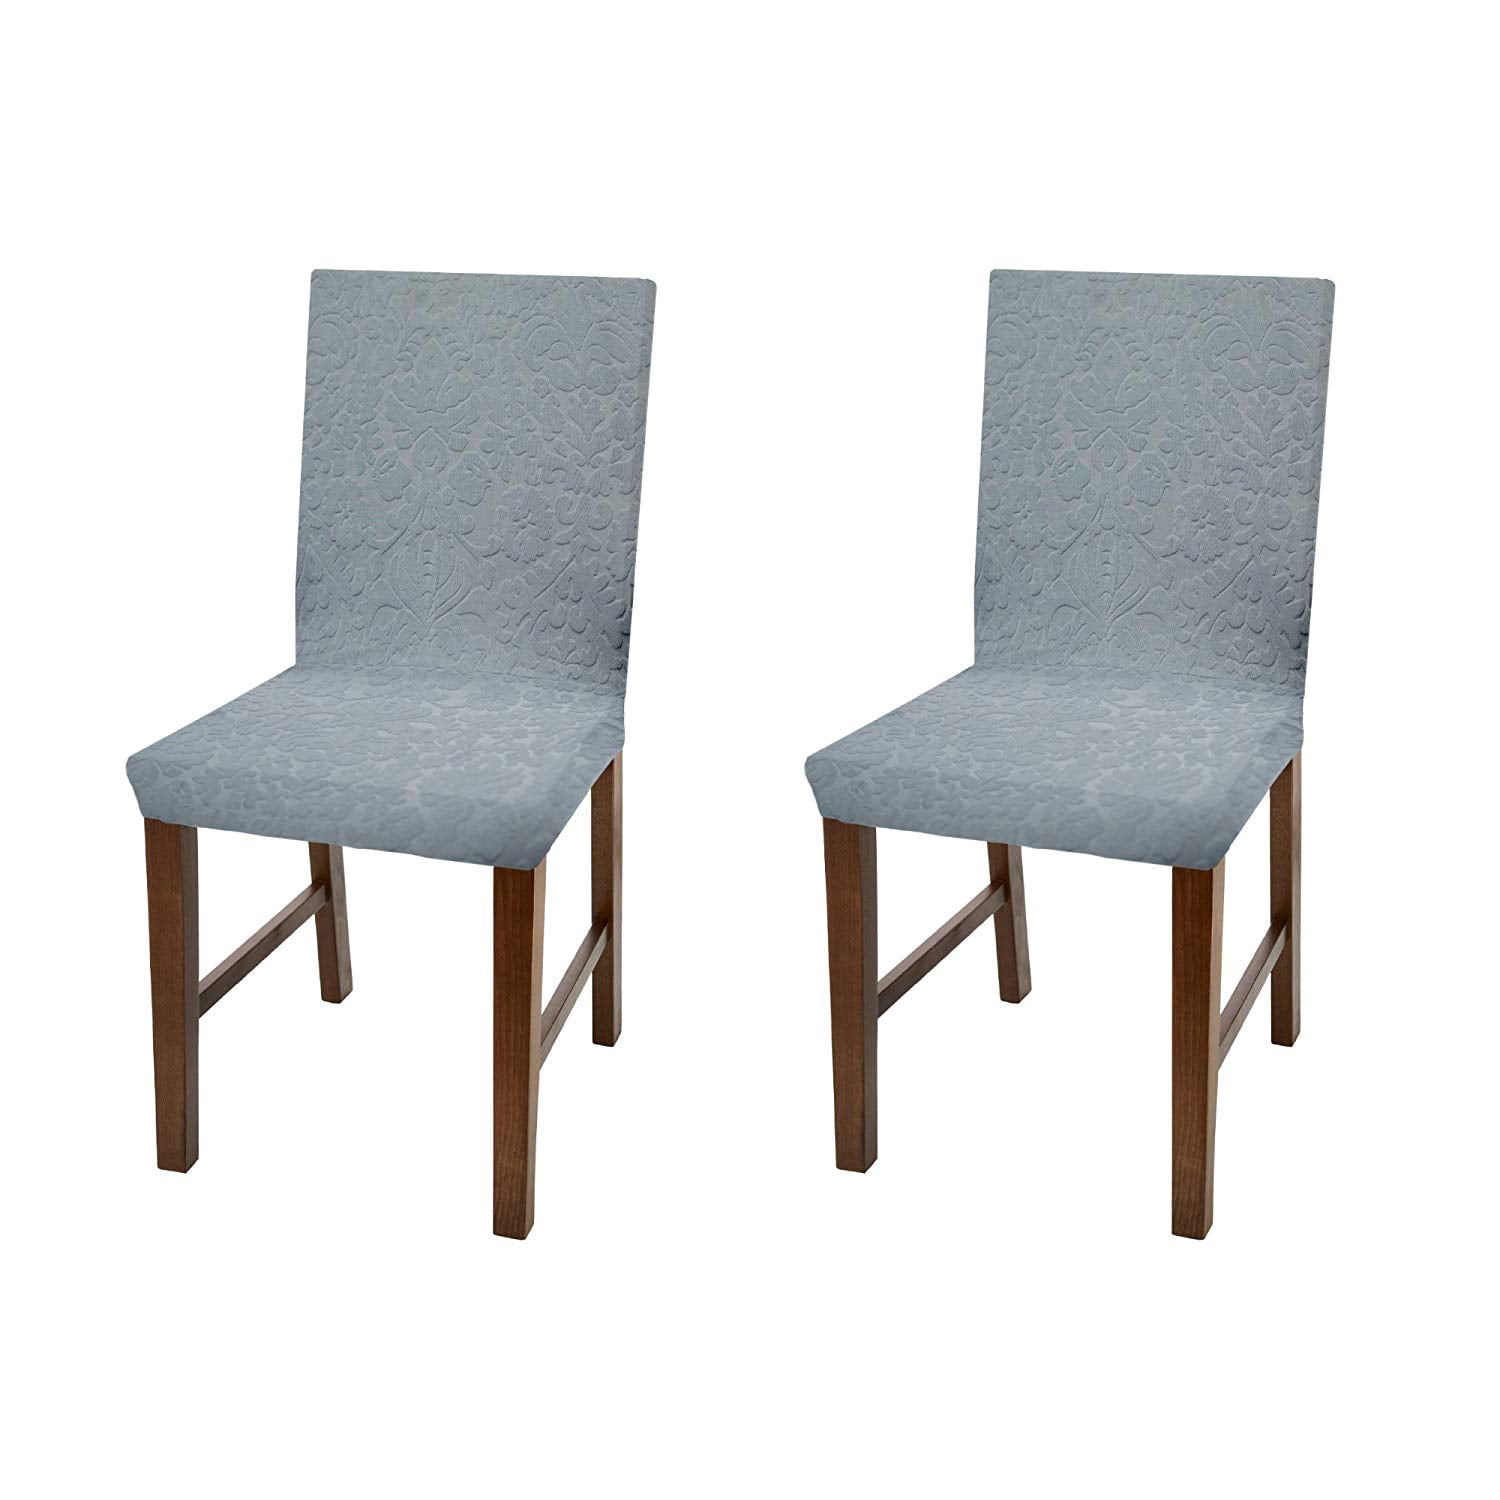 Linen Luxurious Damask Dining, Damask Dining Chair Slipcovers